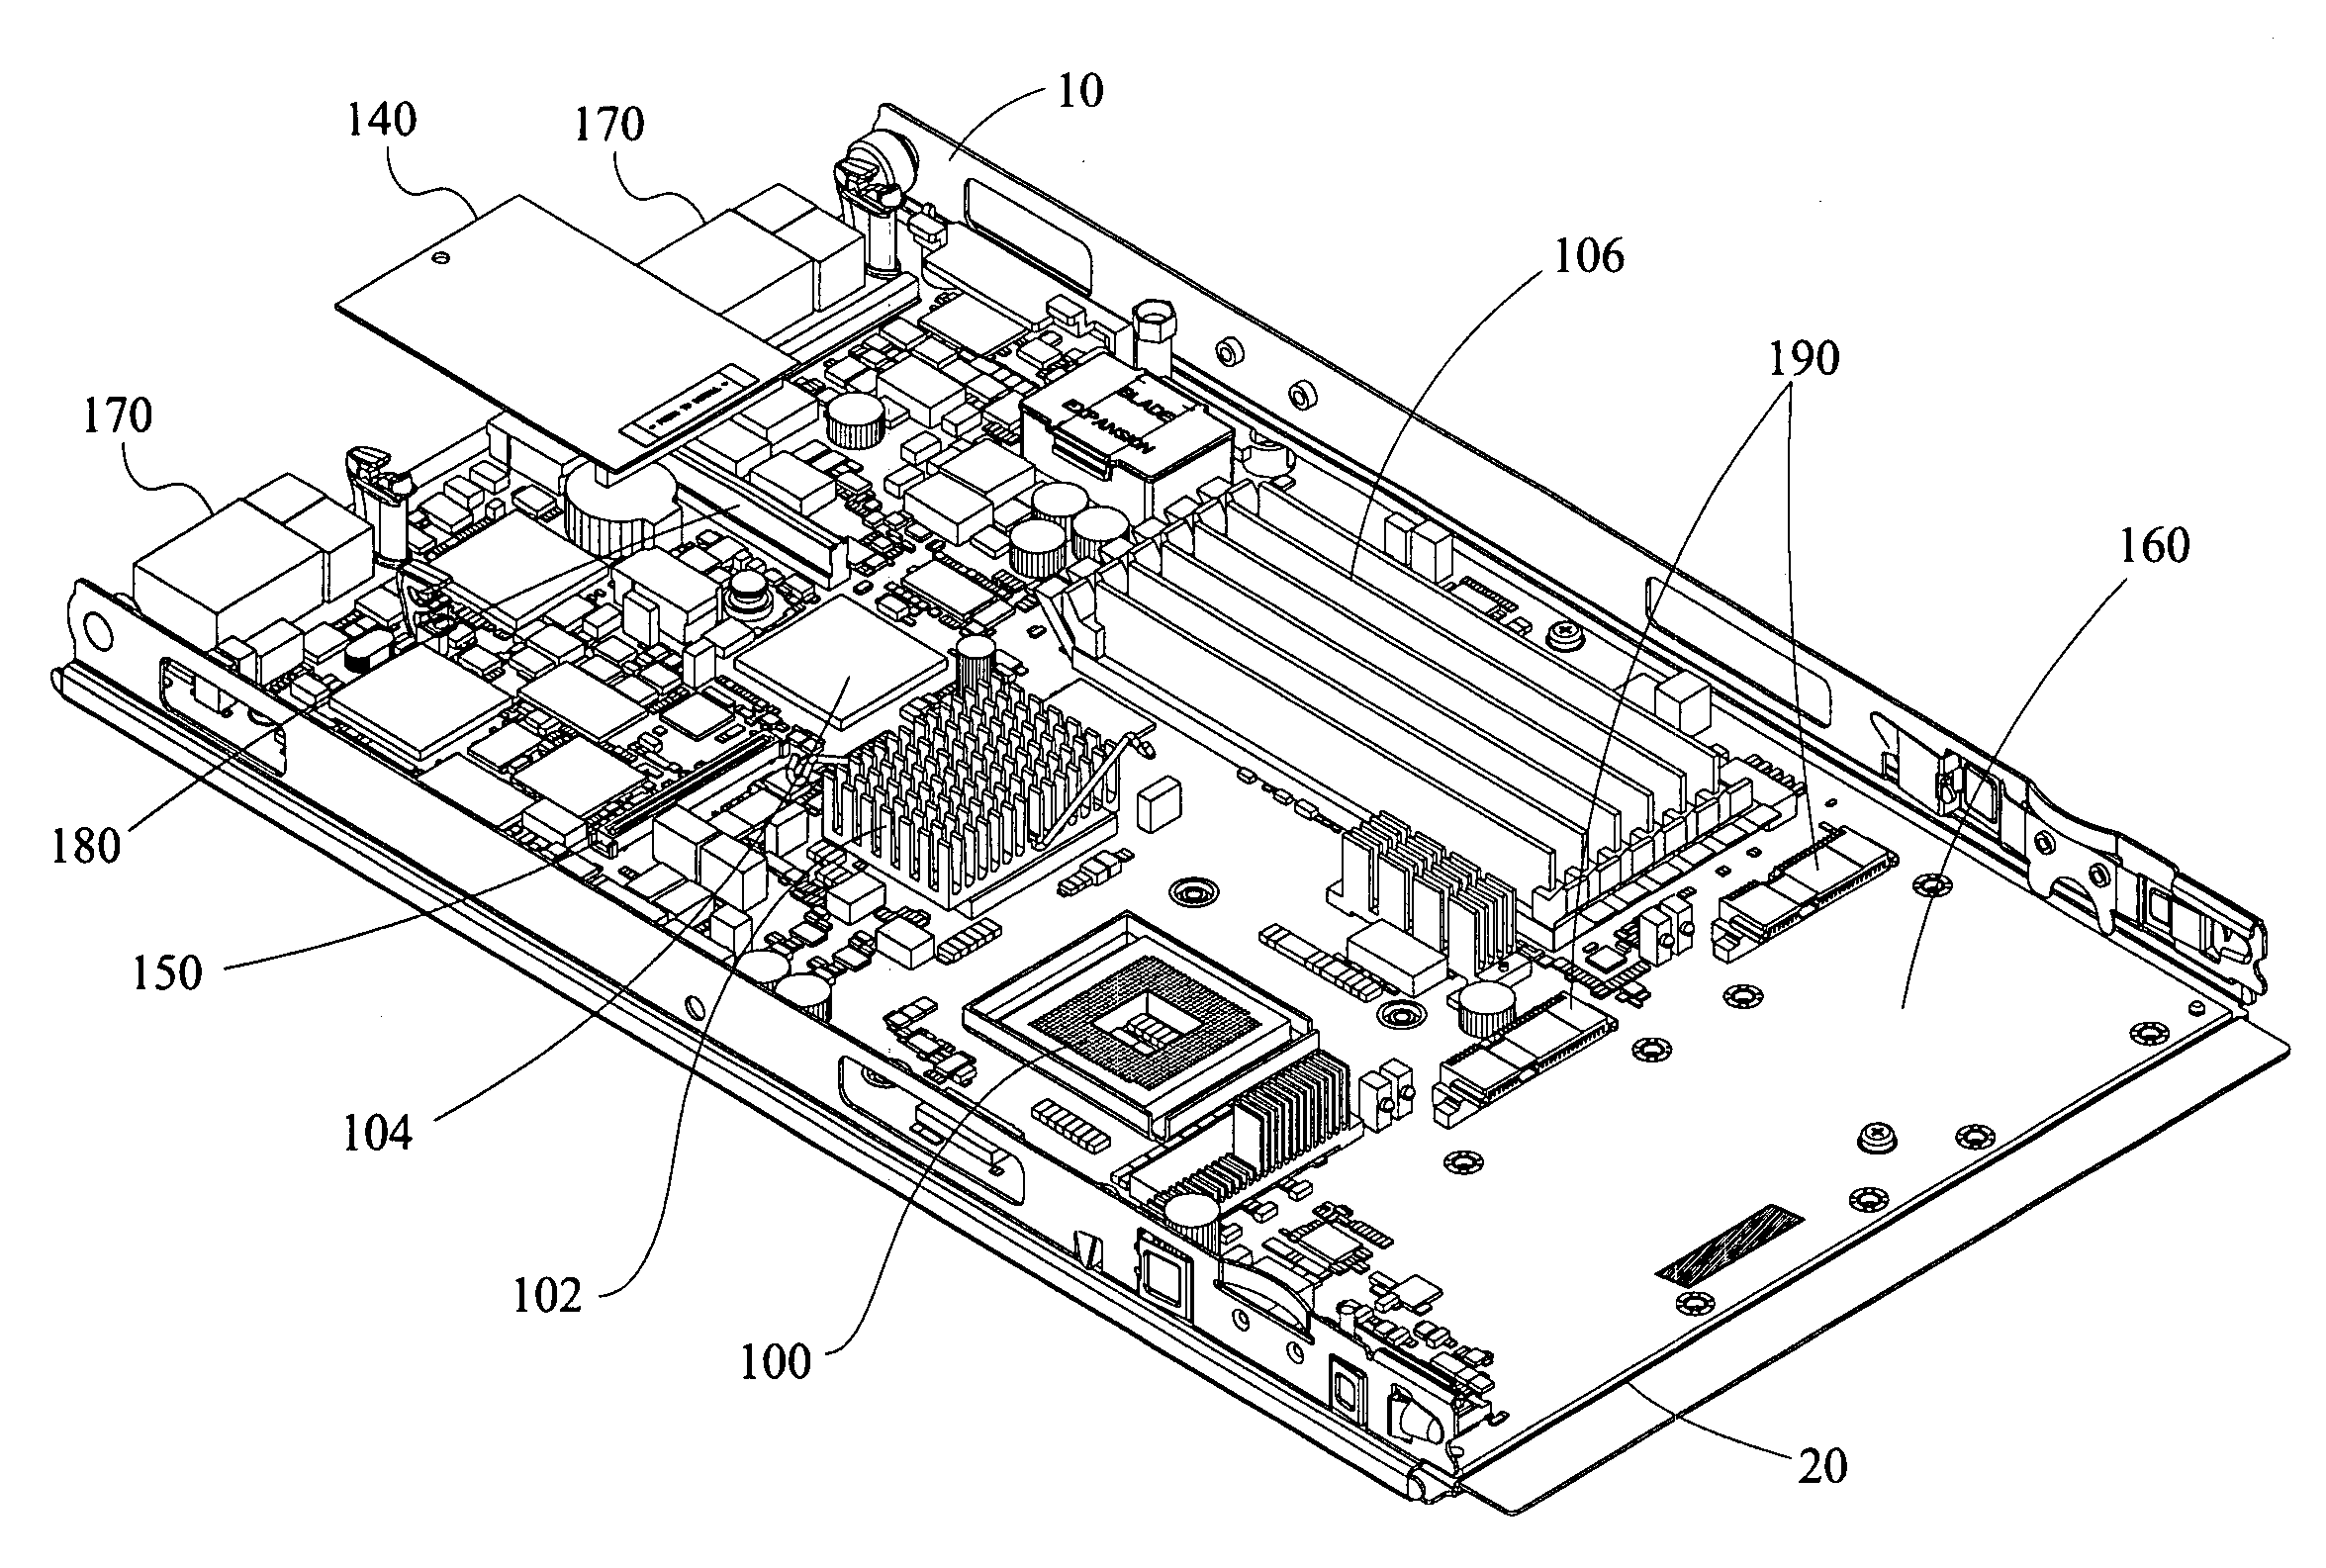 Printed circuit assembly with determination of storage configuration based on installed paddle board